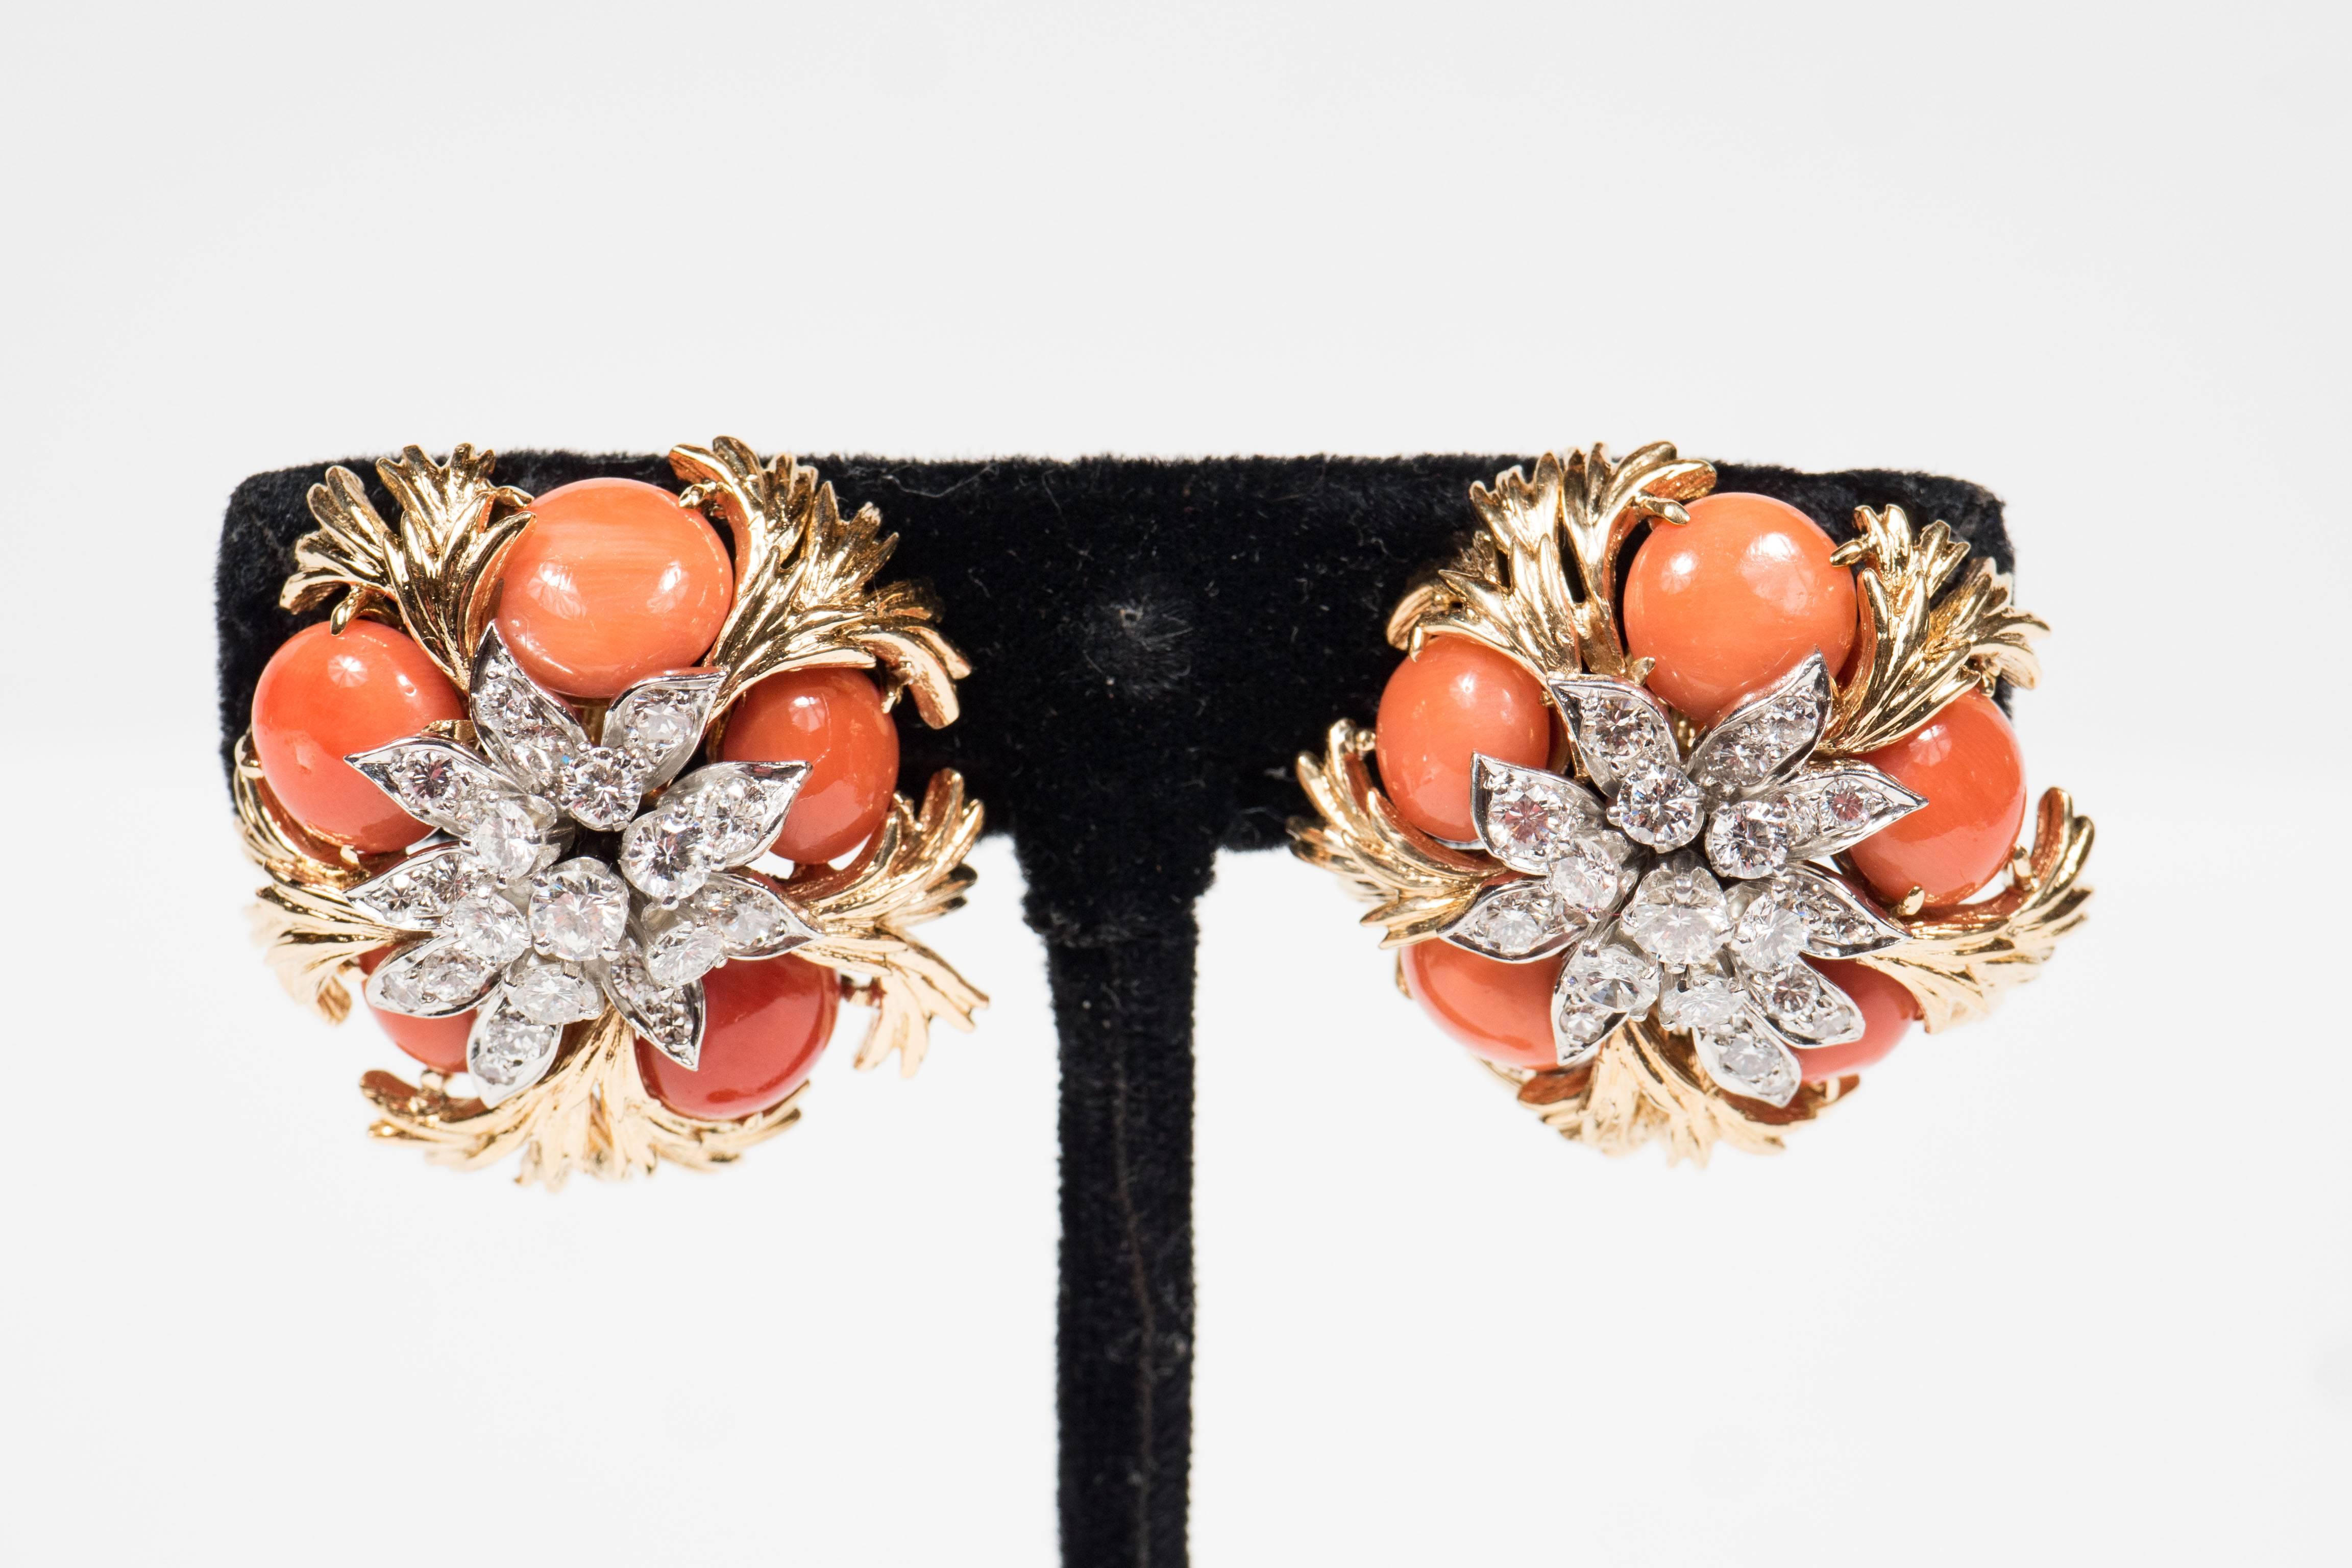 Modernist Mid-Century Pair of 18k Gold, Platinum, Coral and Diamond Earclips by David Webb